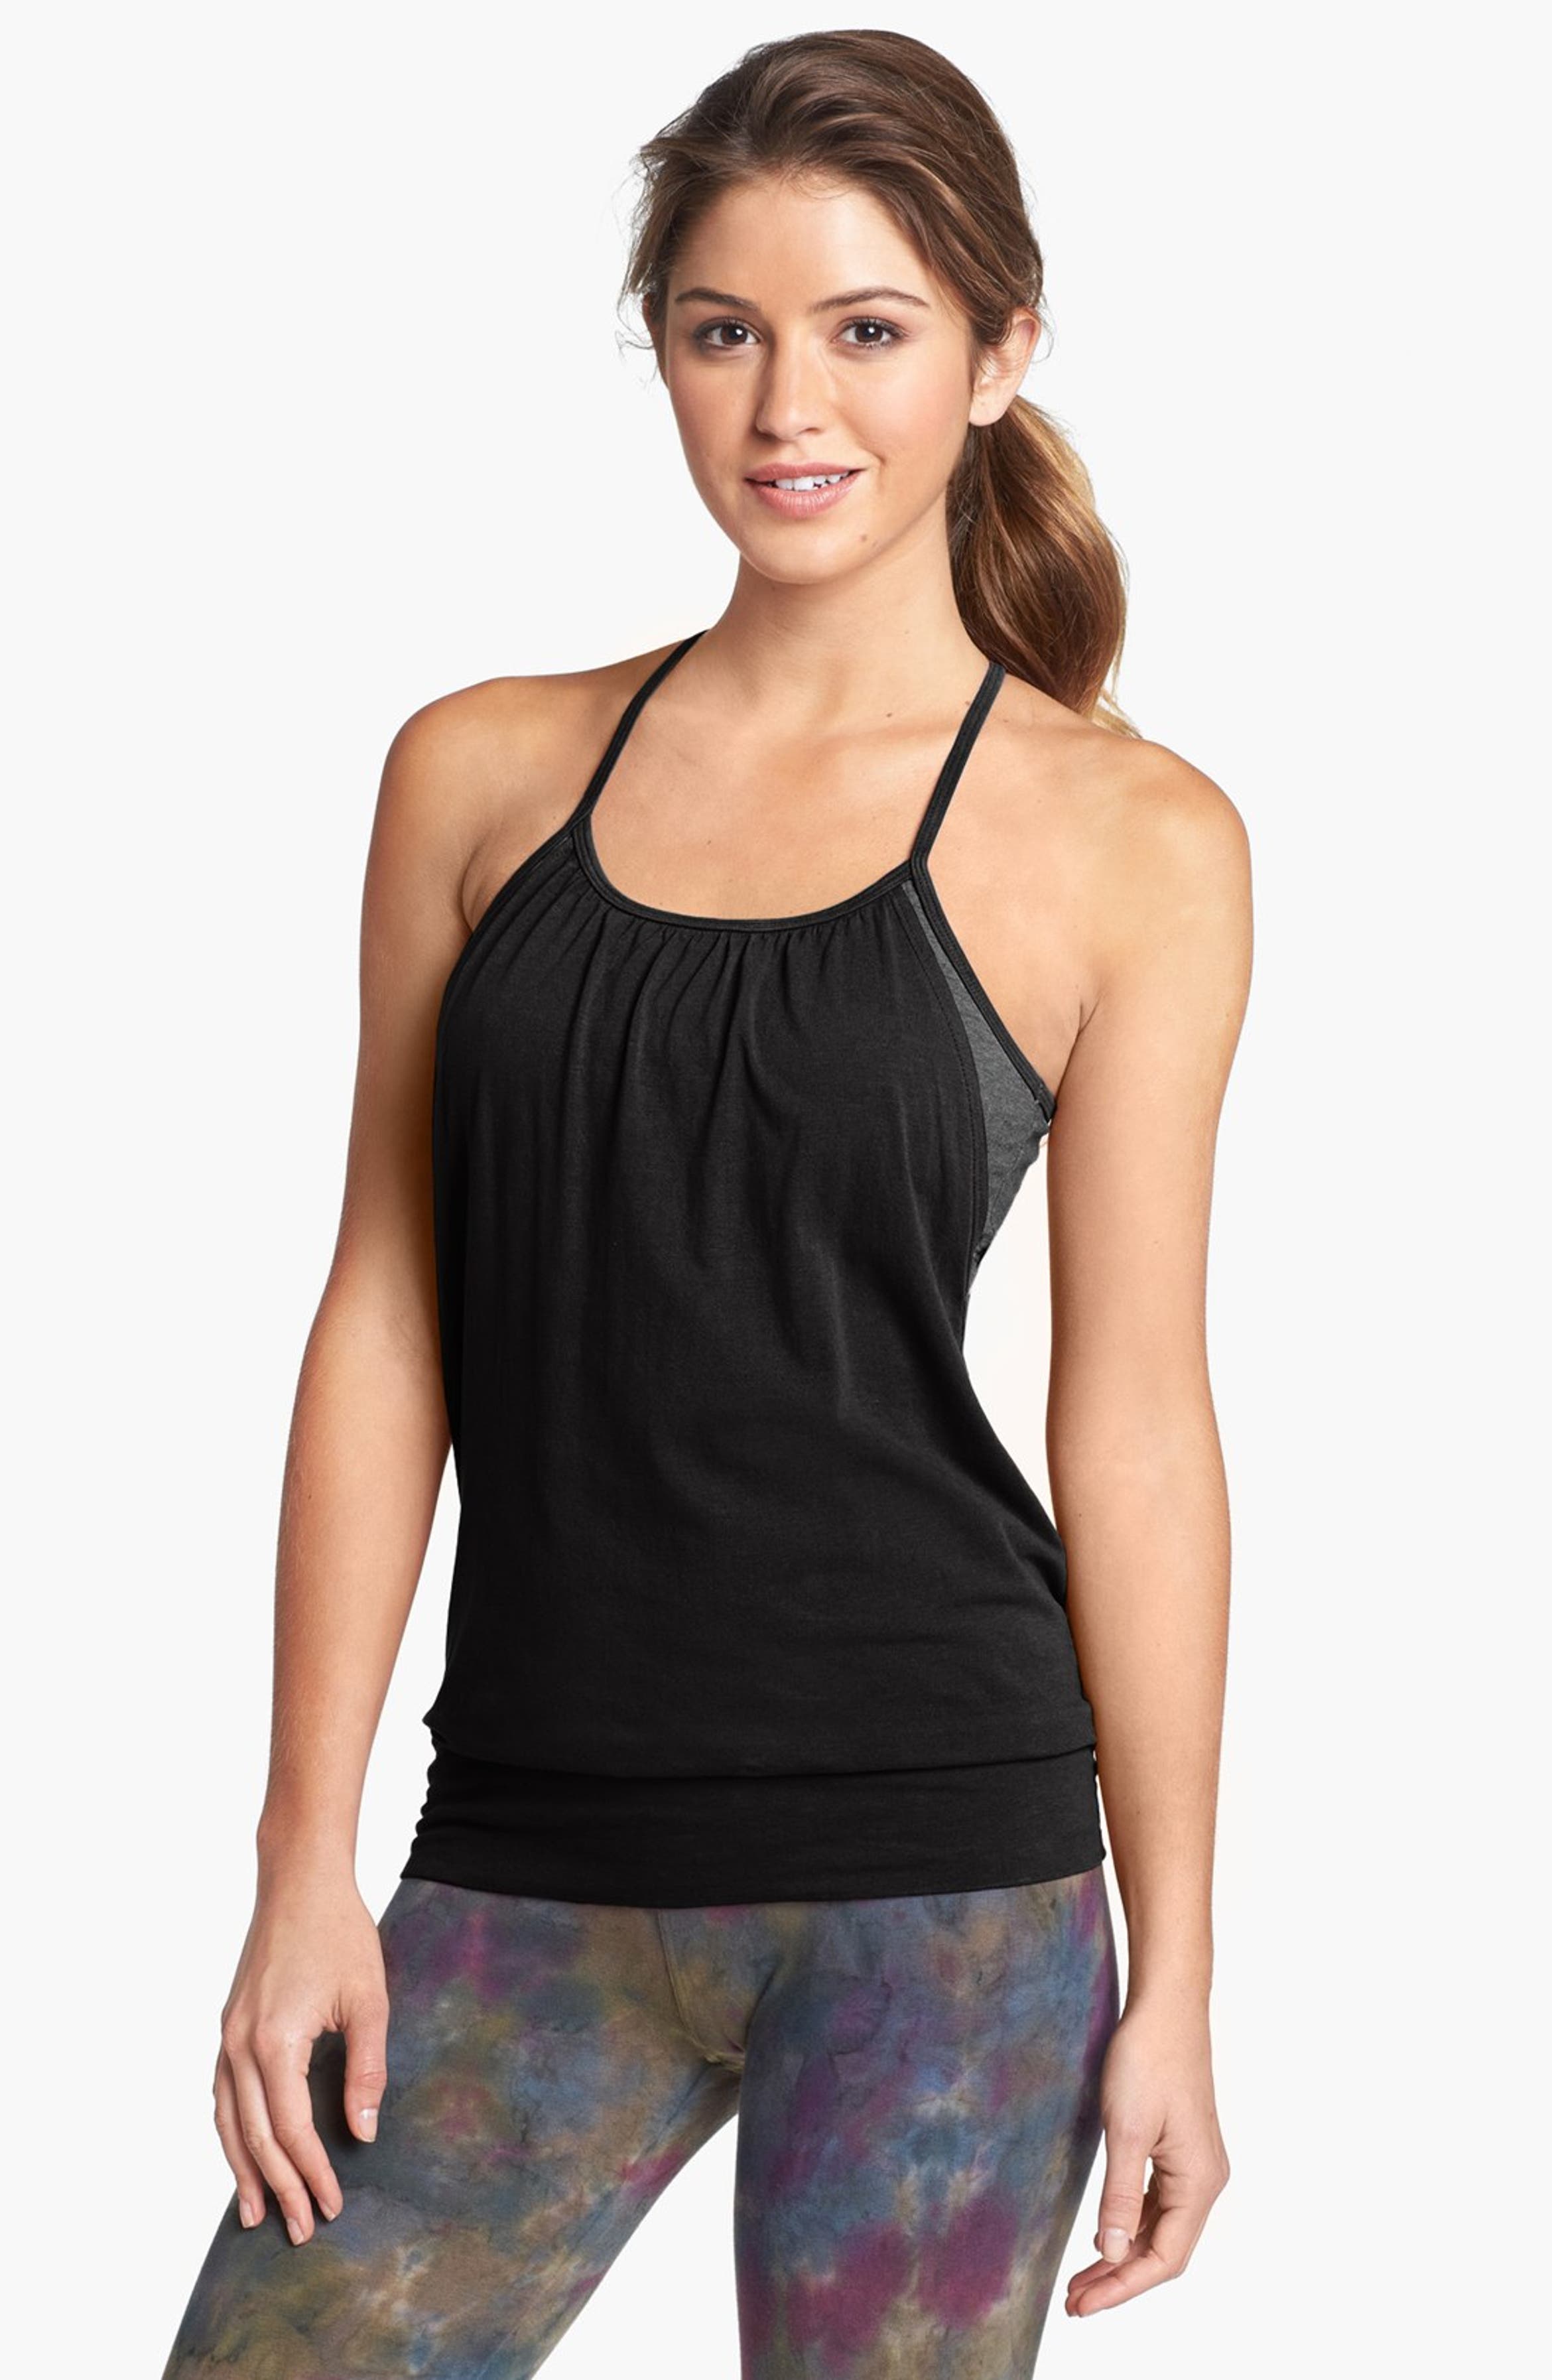 15 Minute Nordstrom workout tanks for Build Muscle